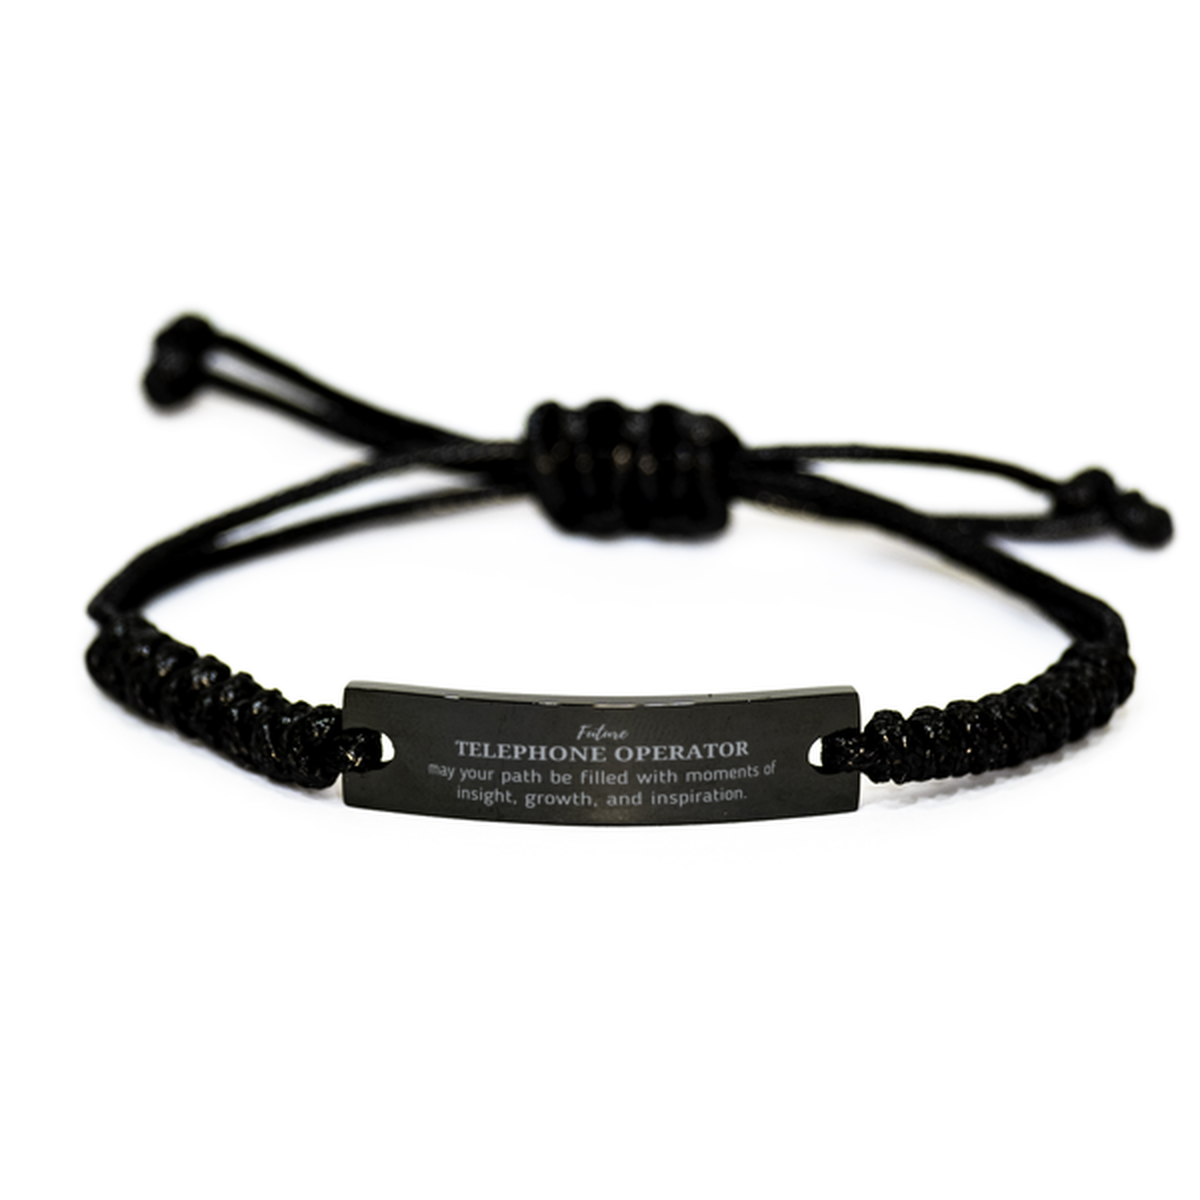 Future Telephone Operator Gifts, May your path be filled with moments of insight, Graduation Gifts for New Telephone Operator, Christmas Unique Black Rope Bracelet For Men, Women, Friends